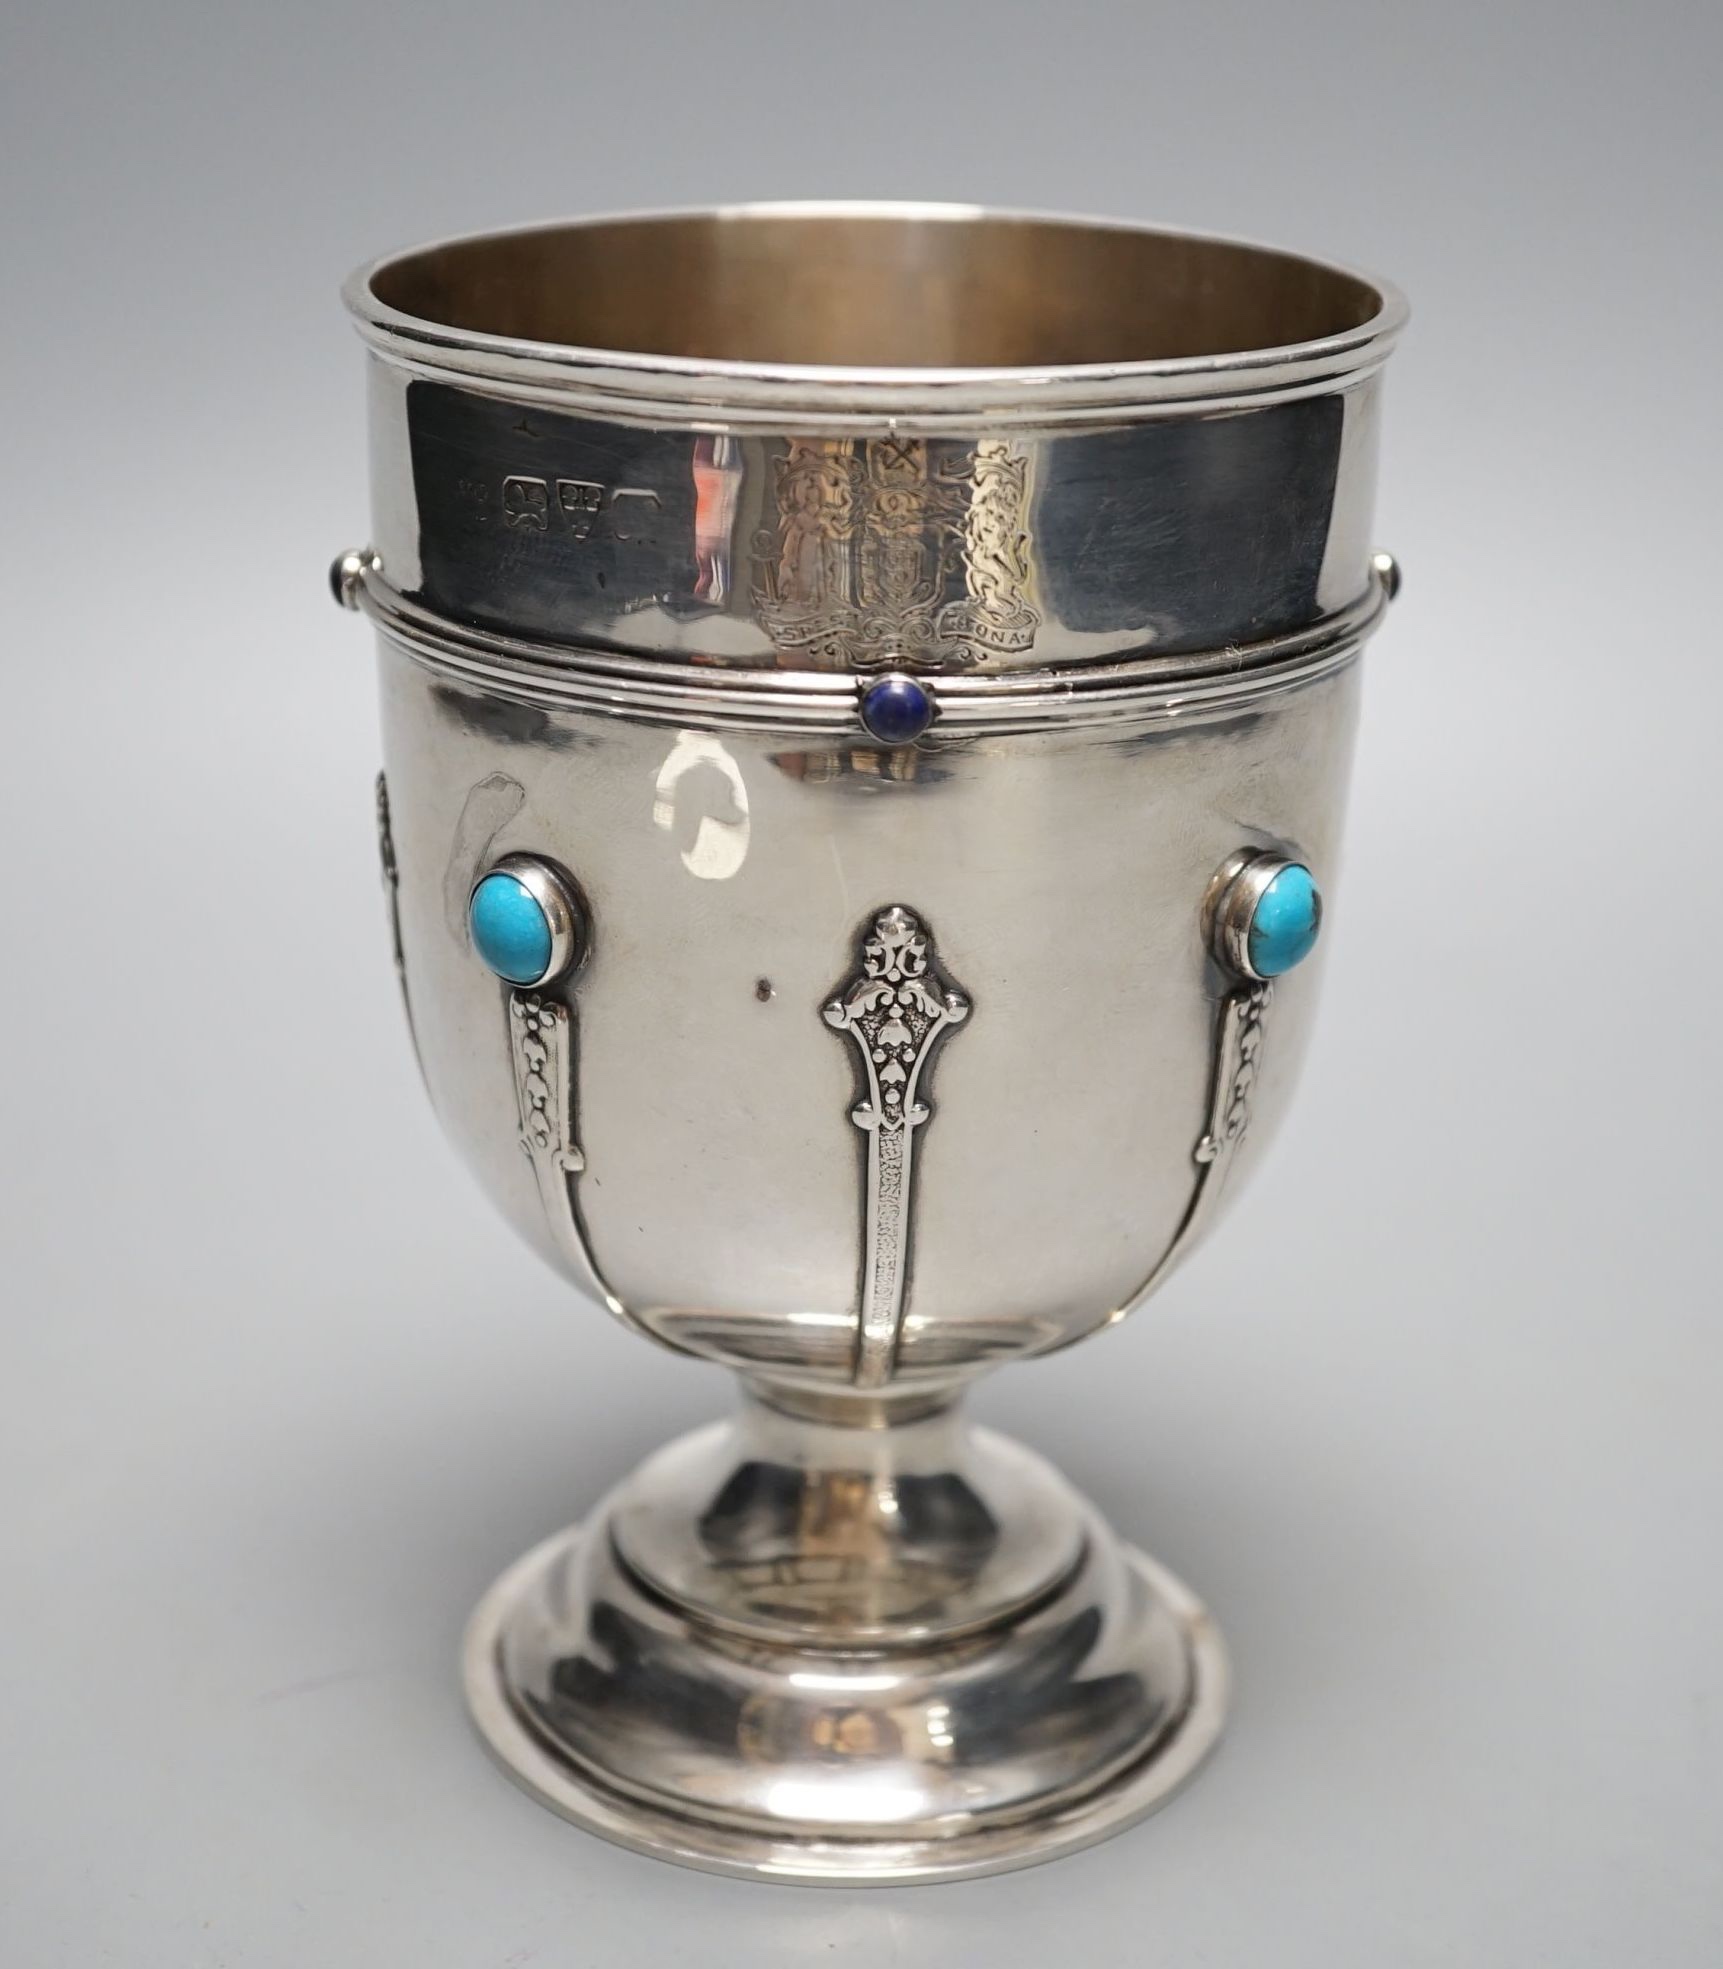 A George V silver goblet or pedestal cup with inset cabochon turquoise and cabochon lapis lazuli, with engraved crest and strapwork decoration, Henry Moreton, Chester, 1913, 13.6cm, gross weight 7oz.